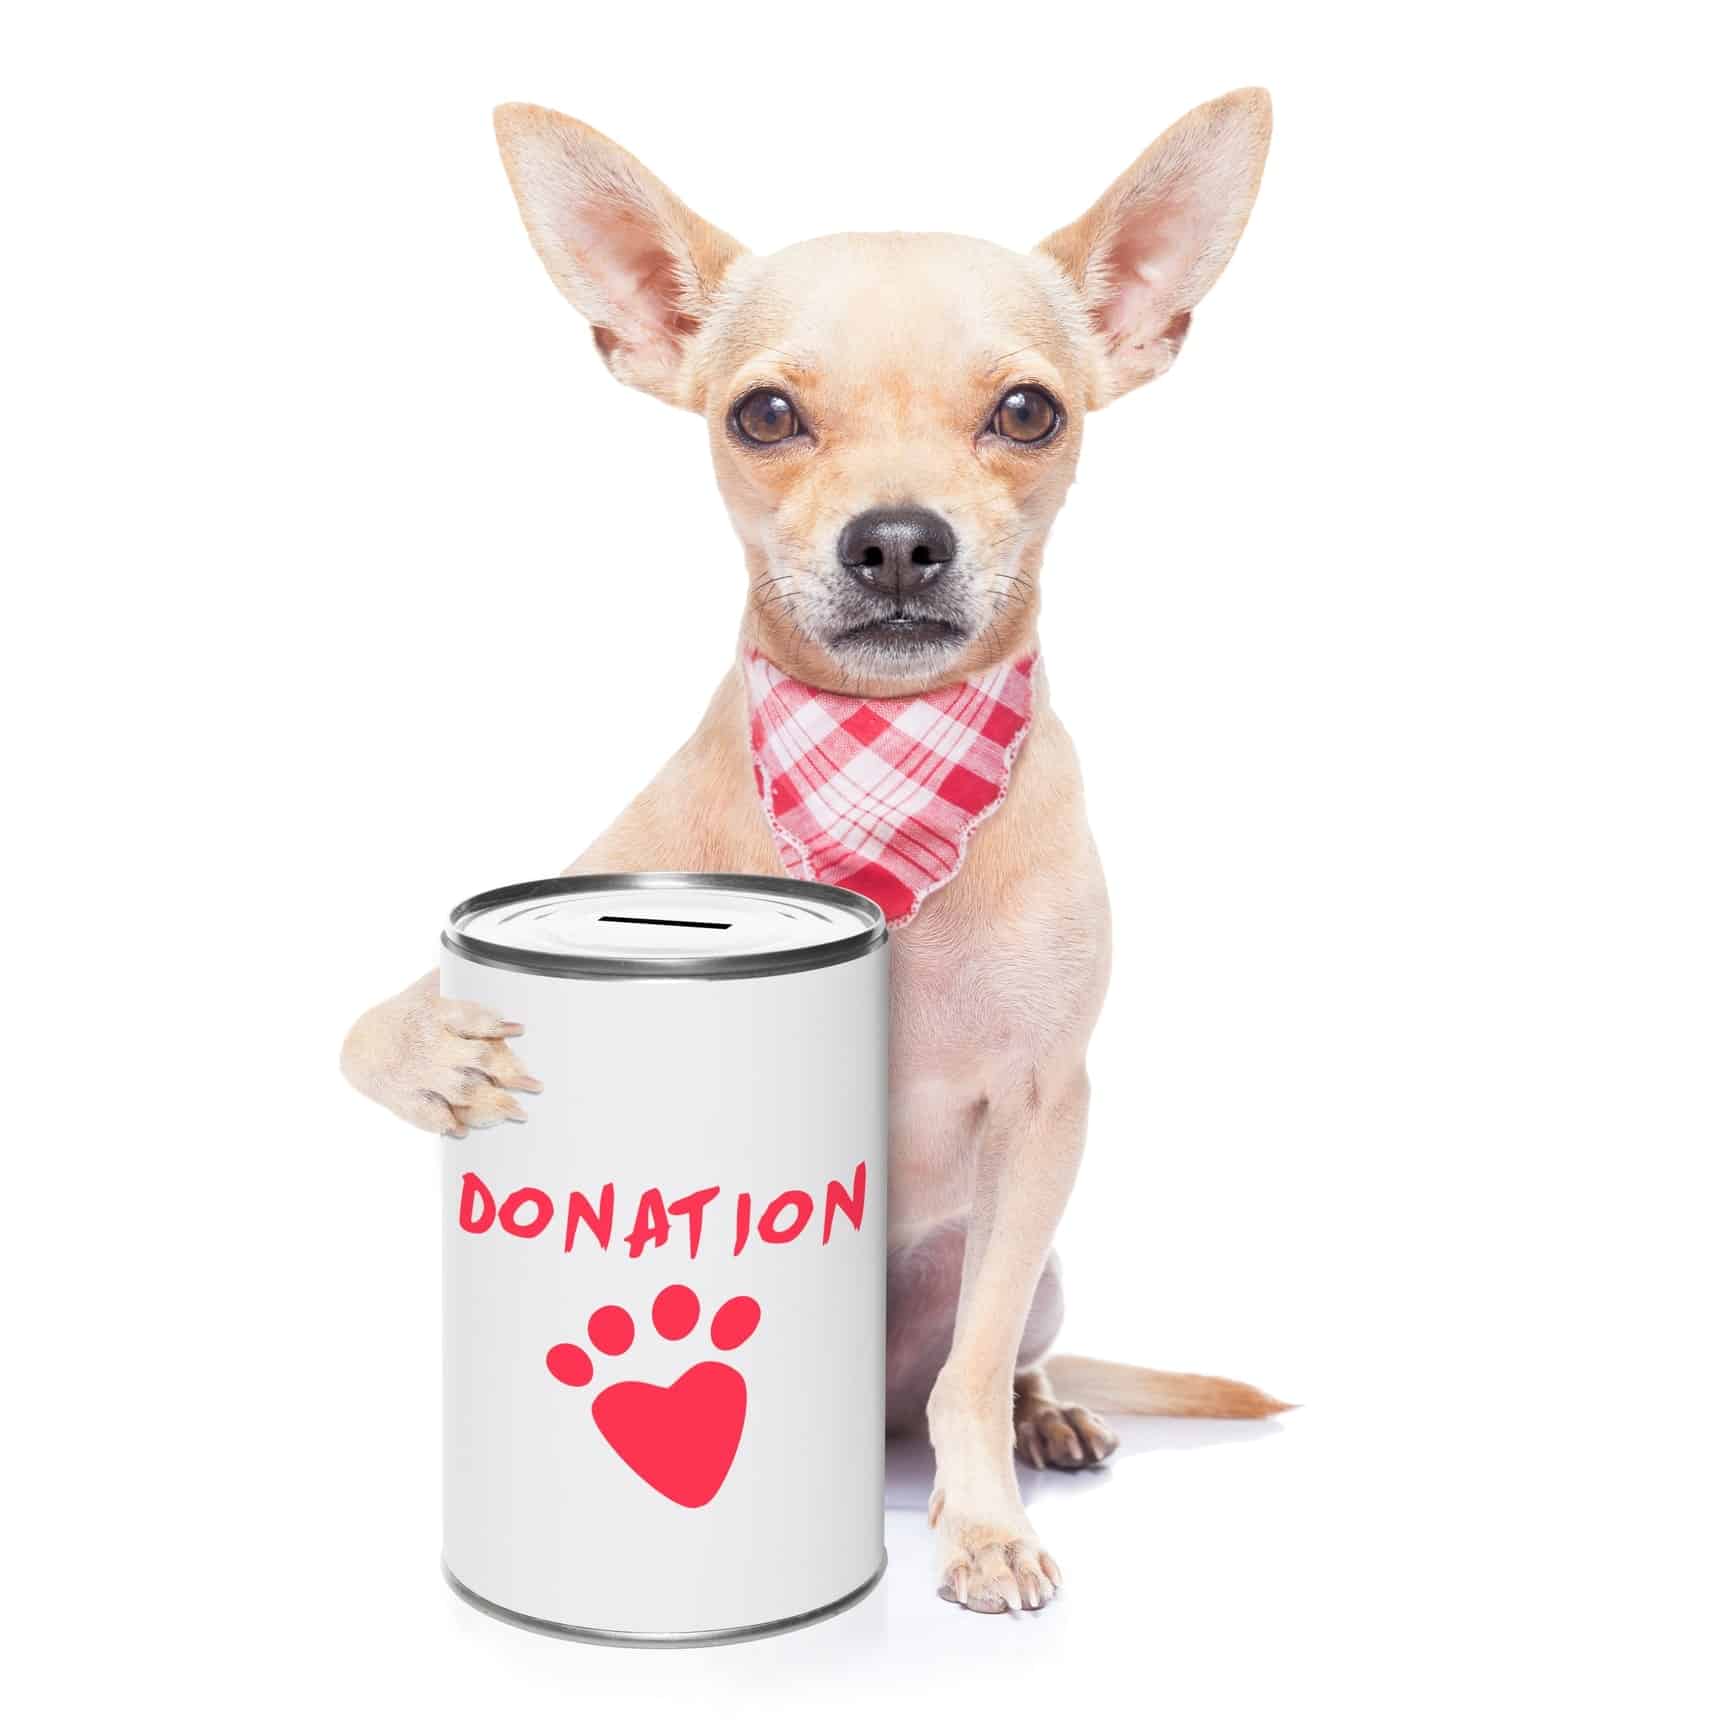 How Nonprofits Can Receive Cash Donations For Referring An Organization